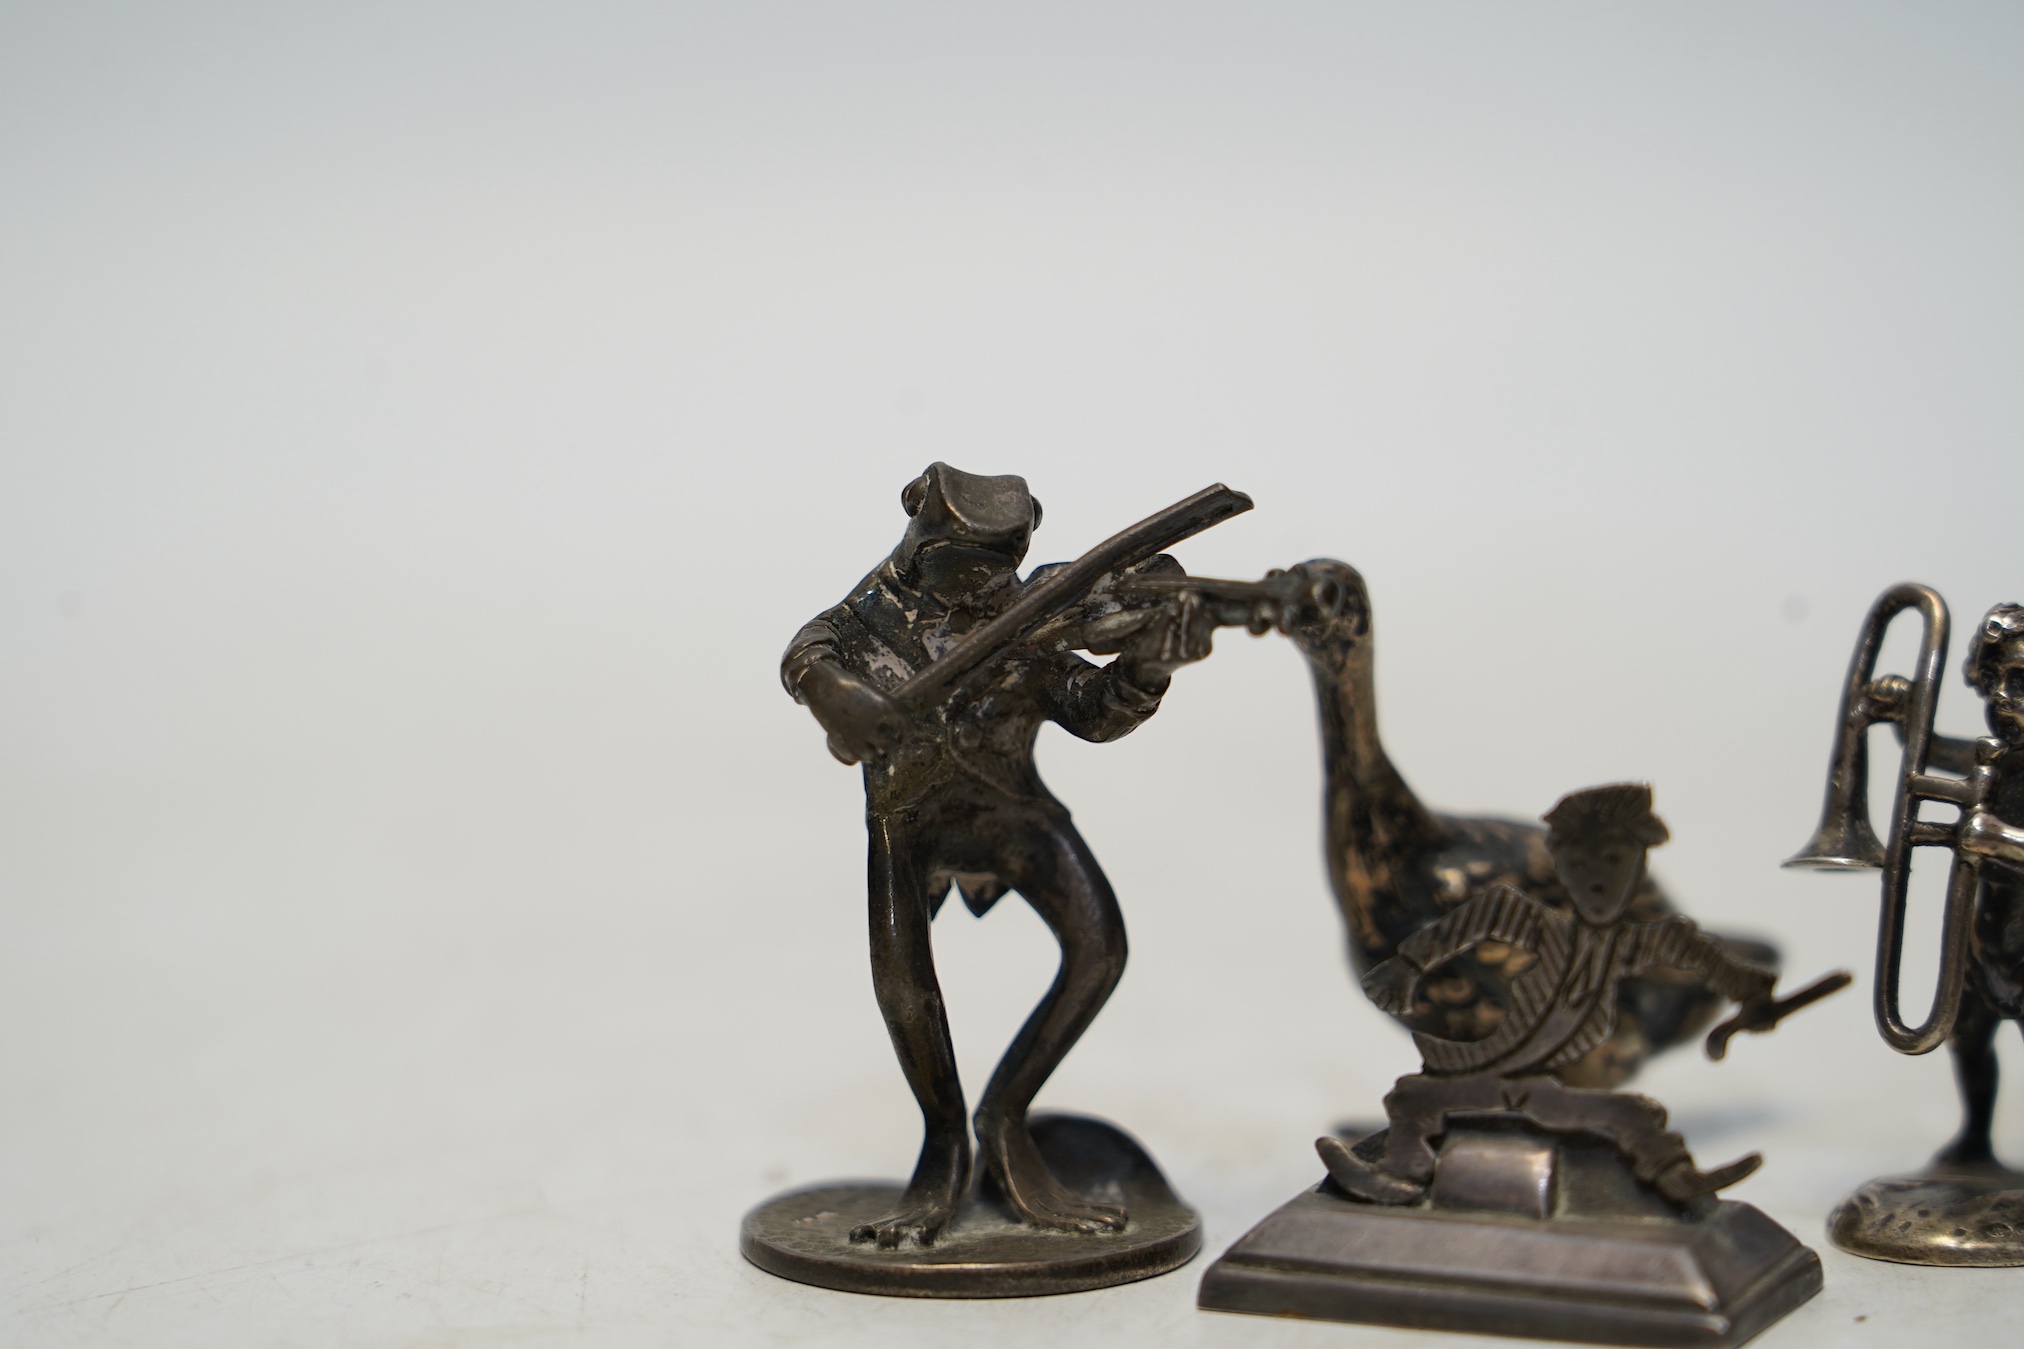 Two early 20th century miniature silver models of a goose and a cherub with trombone, 37mm, an 800 standard figural menu holder and a later silver model of a frog with violin. Condition - fair